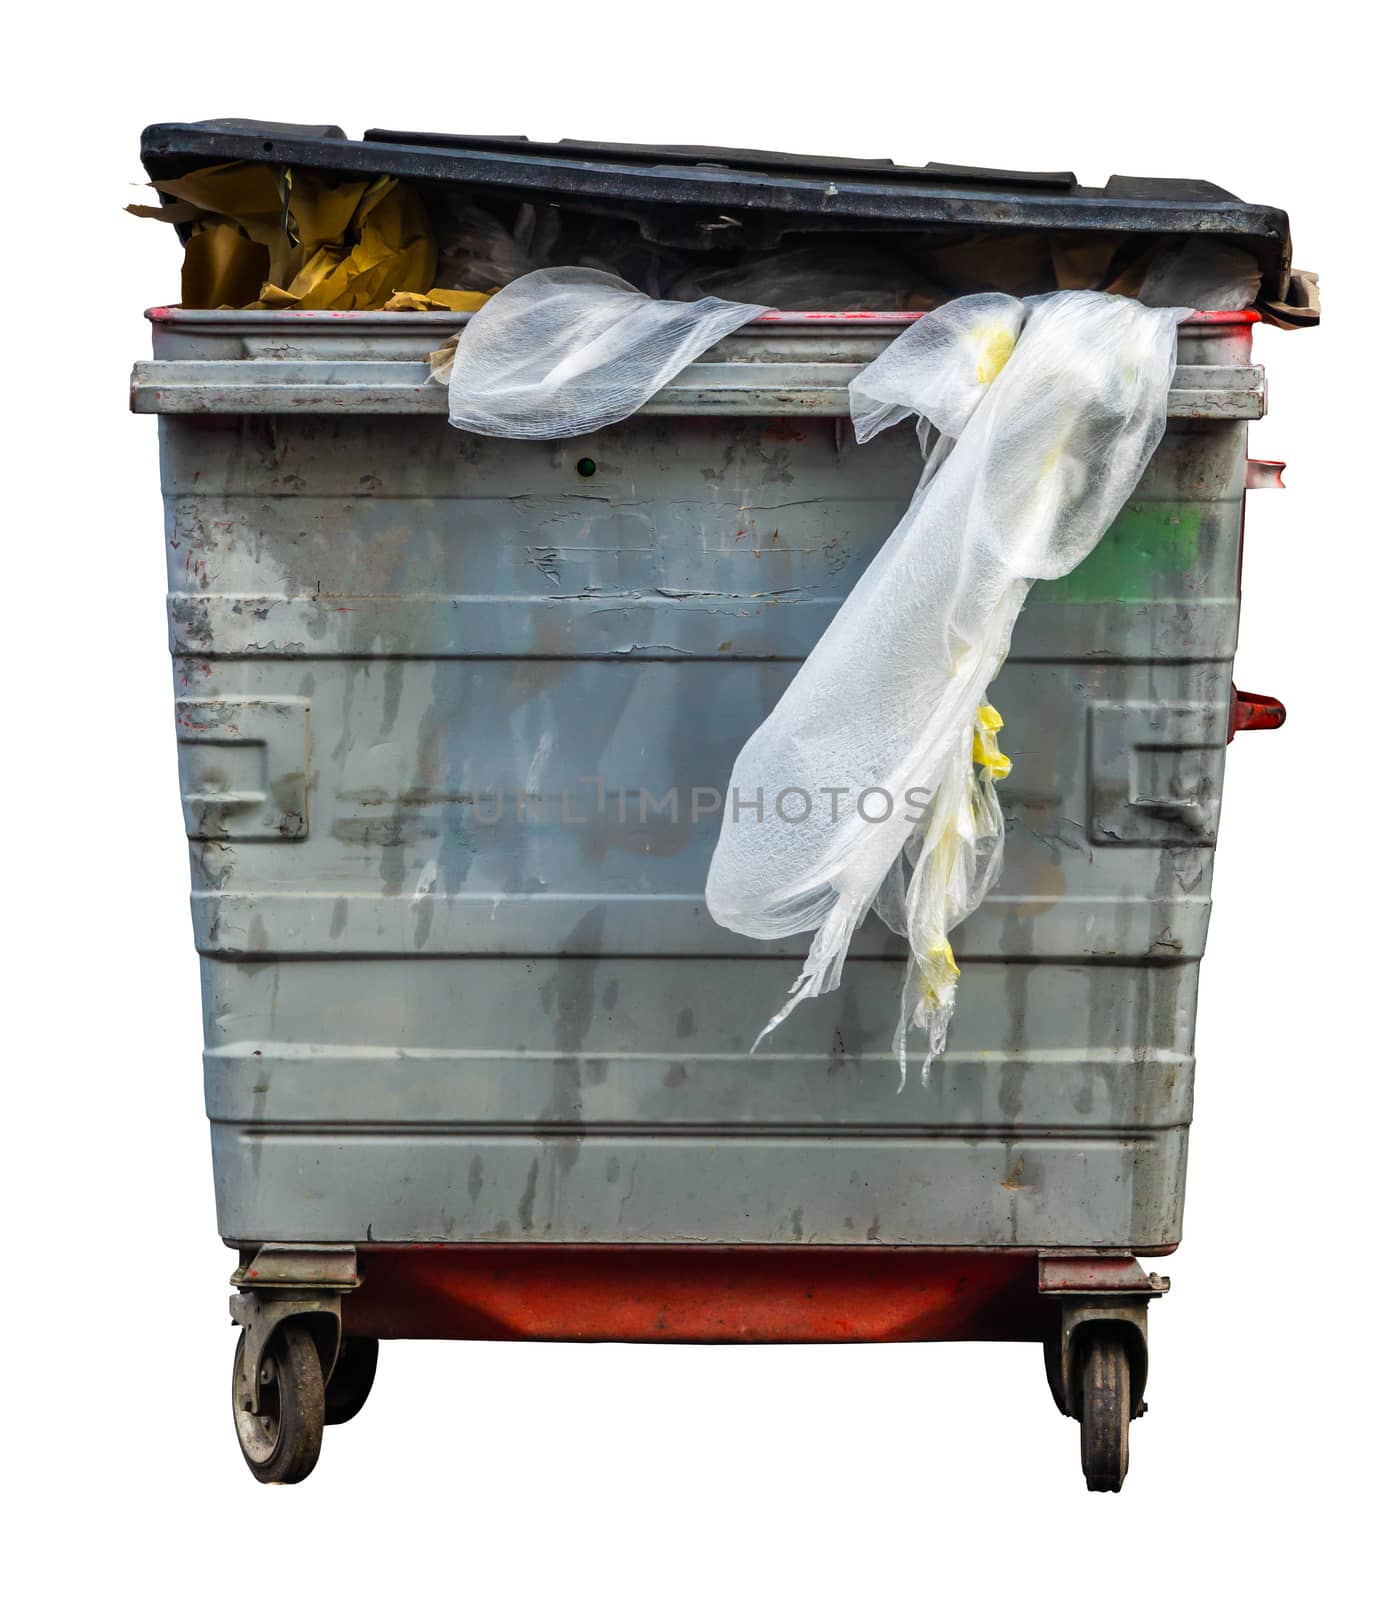 Isolated Grungy Wheelie Recycling Or Trash Can (Bin) On A White Background